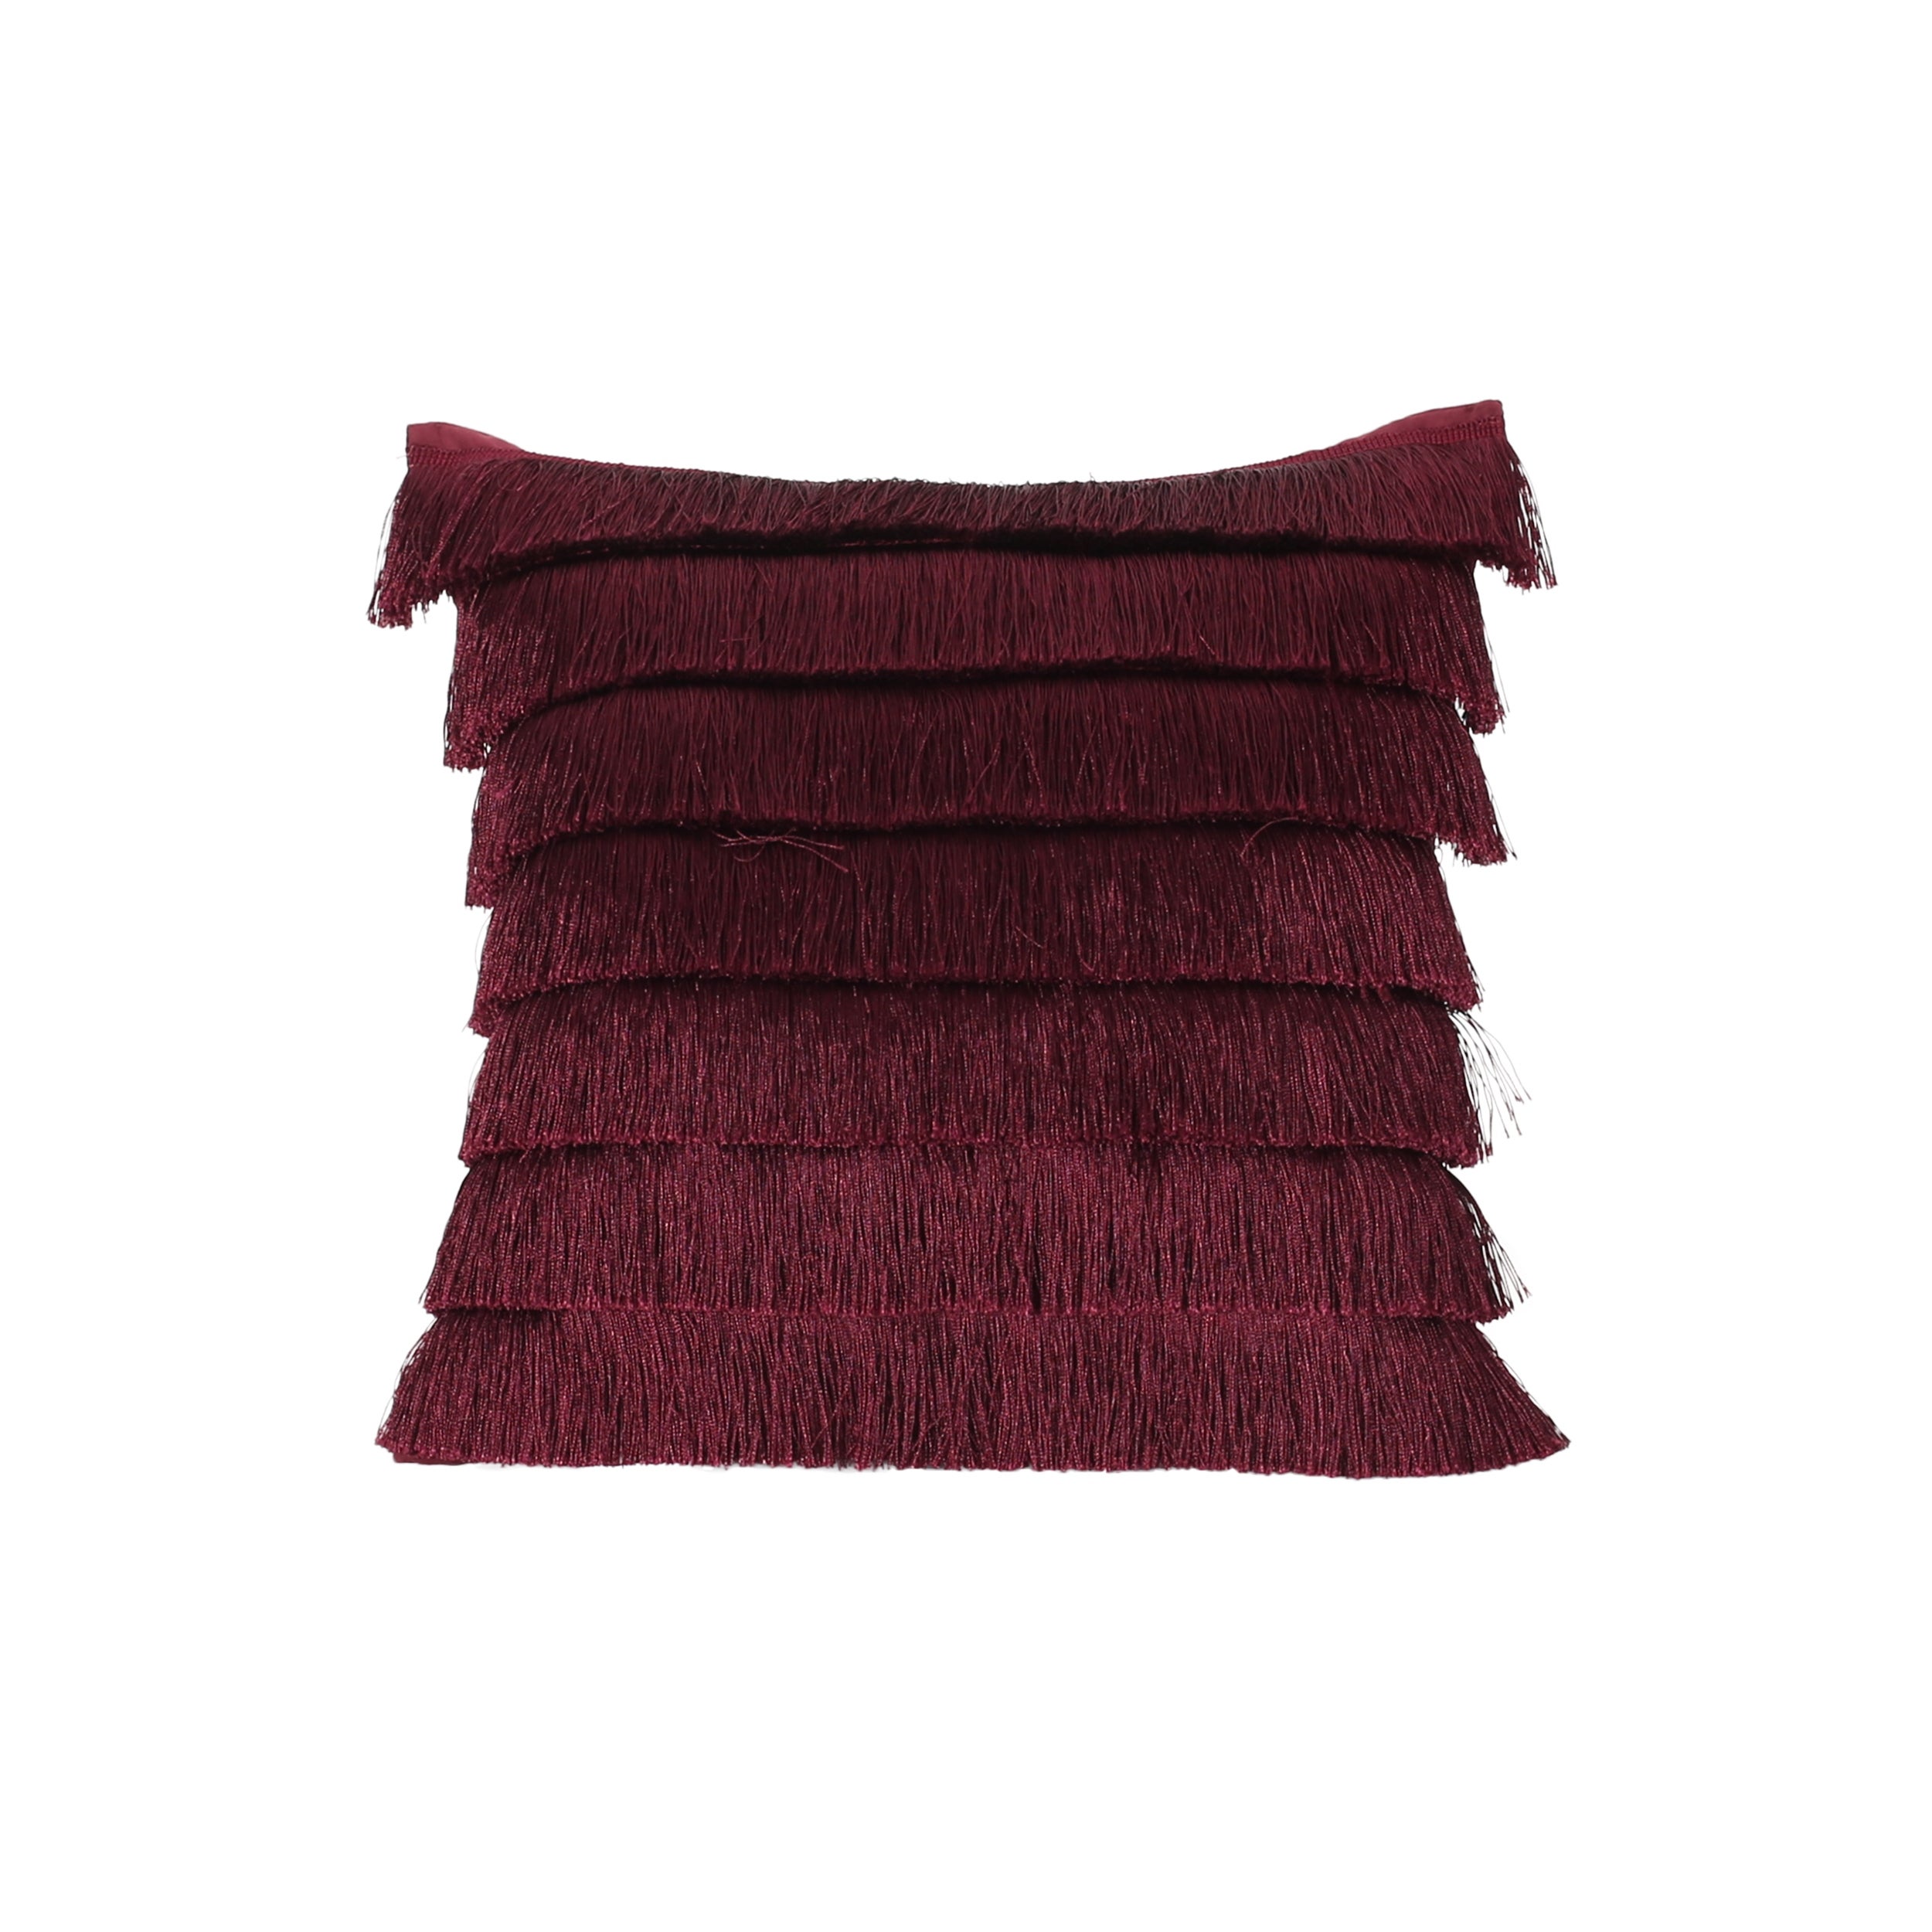 Bantry Glam Fabric Square Pillow Cover with Fringes by Christopher Knight Home